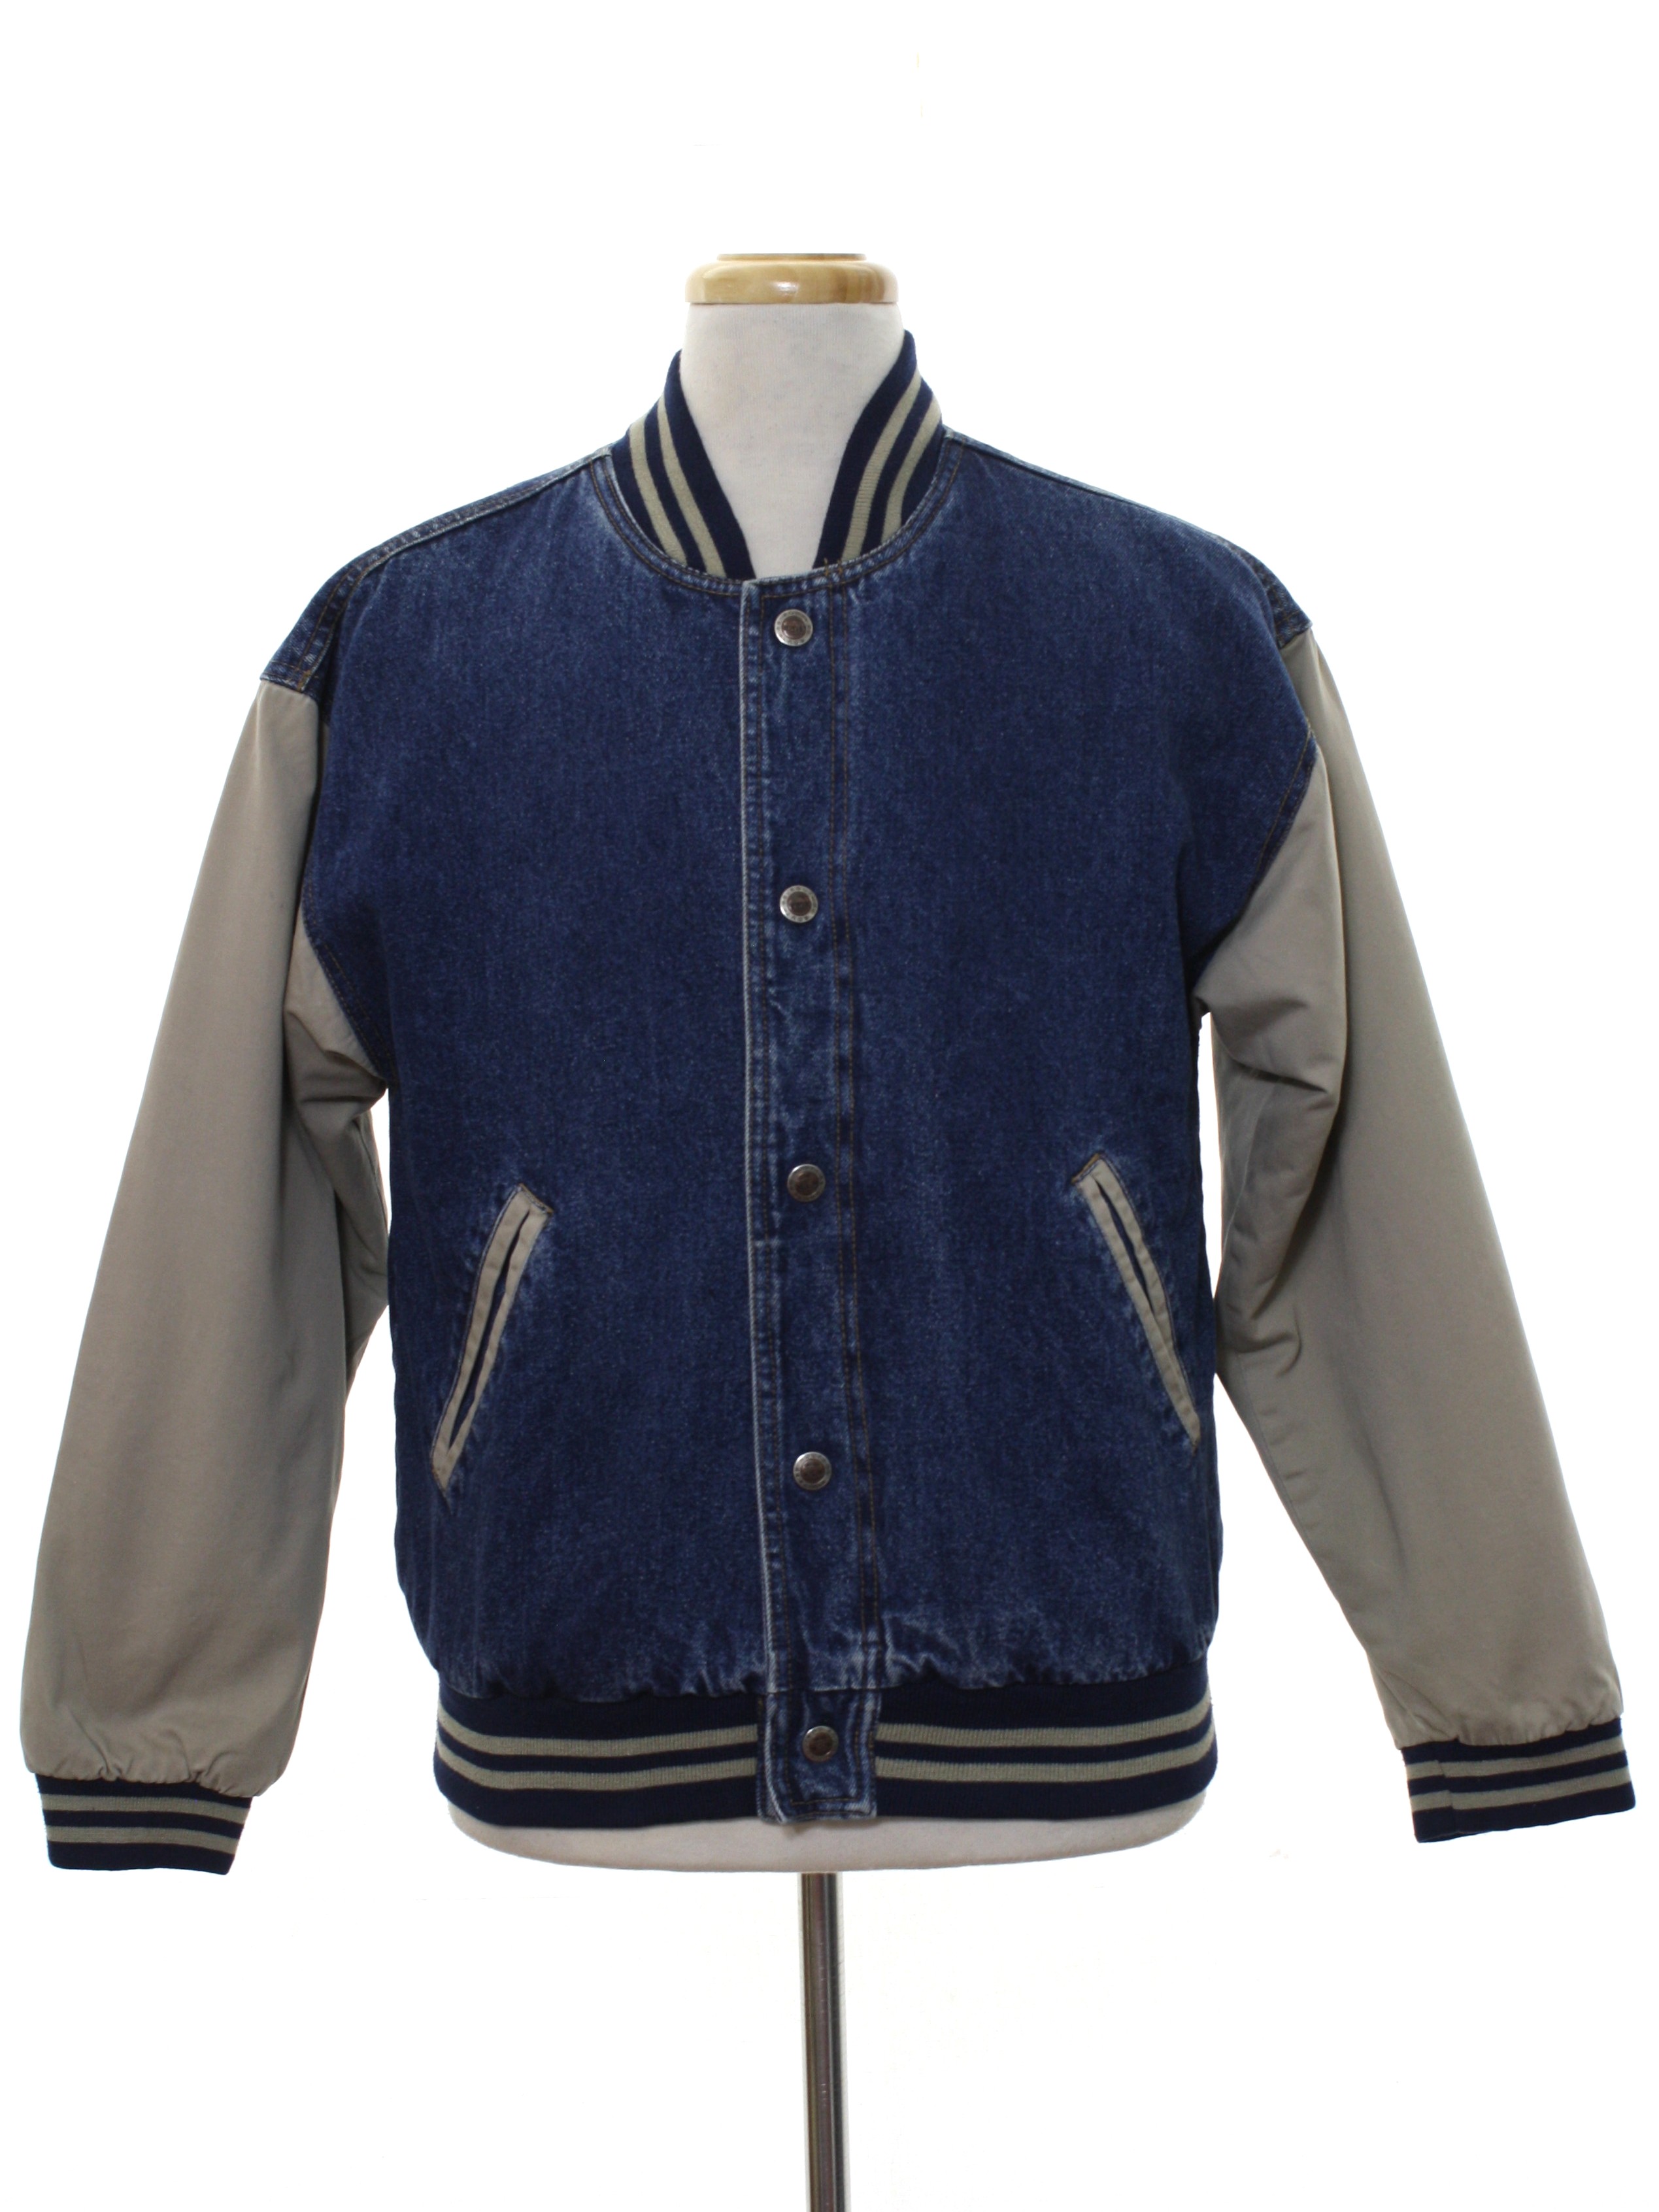 1990's Retro Jacket: 90s or newer -Route 66- Mens dark blue and tan ...